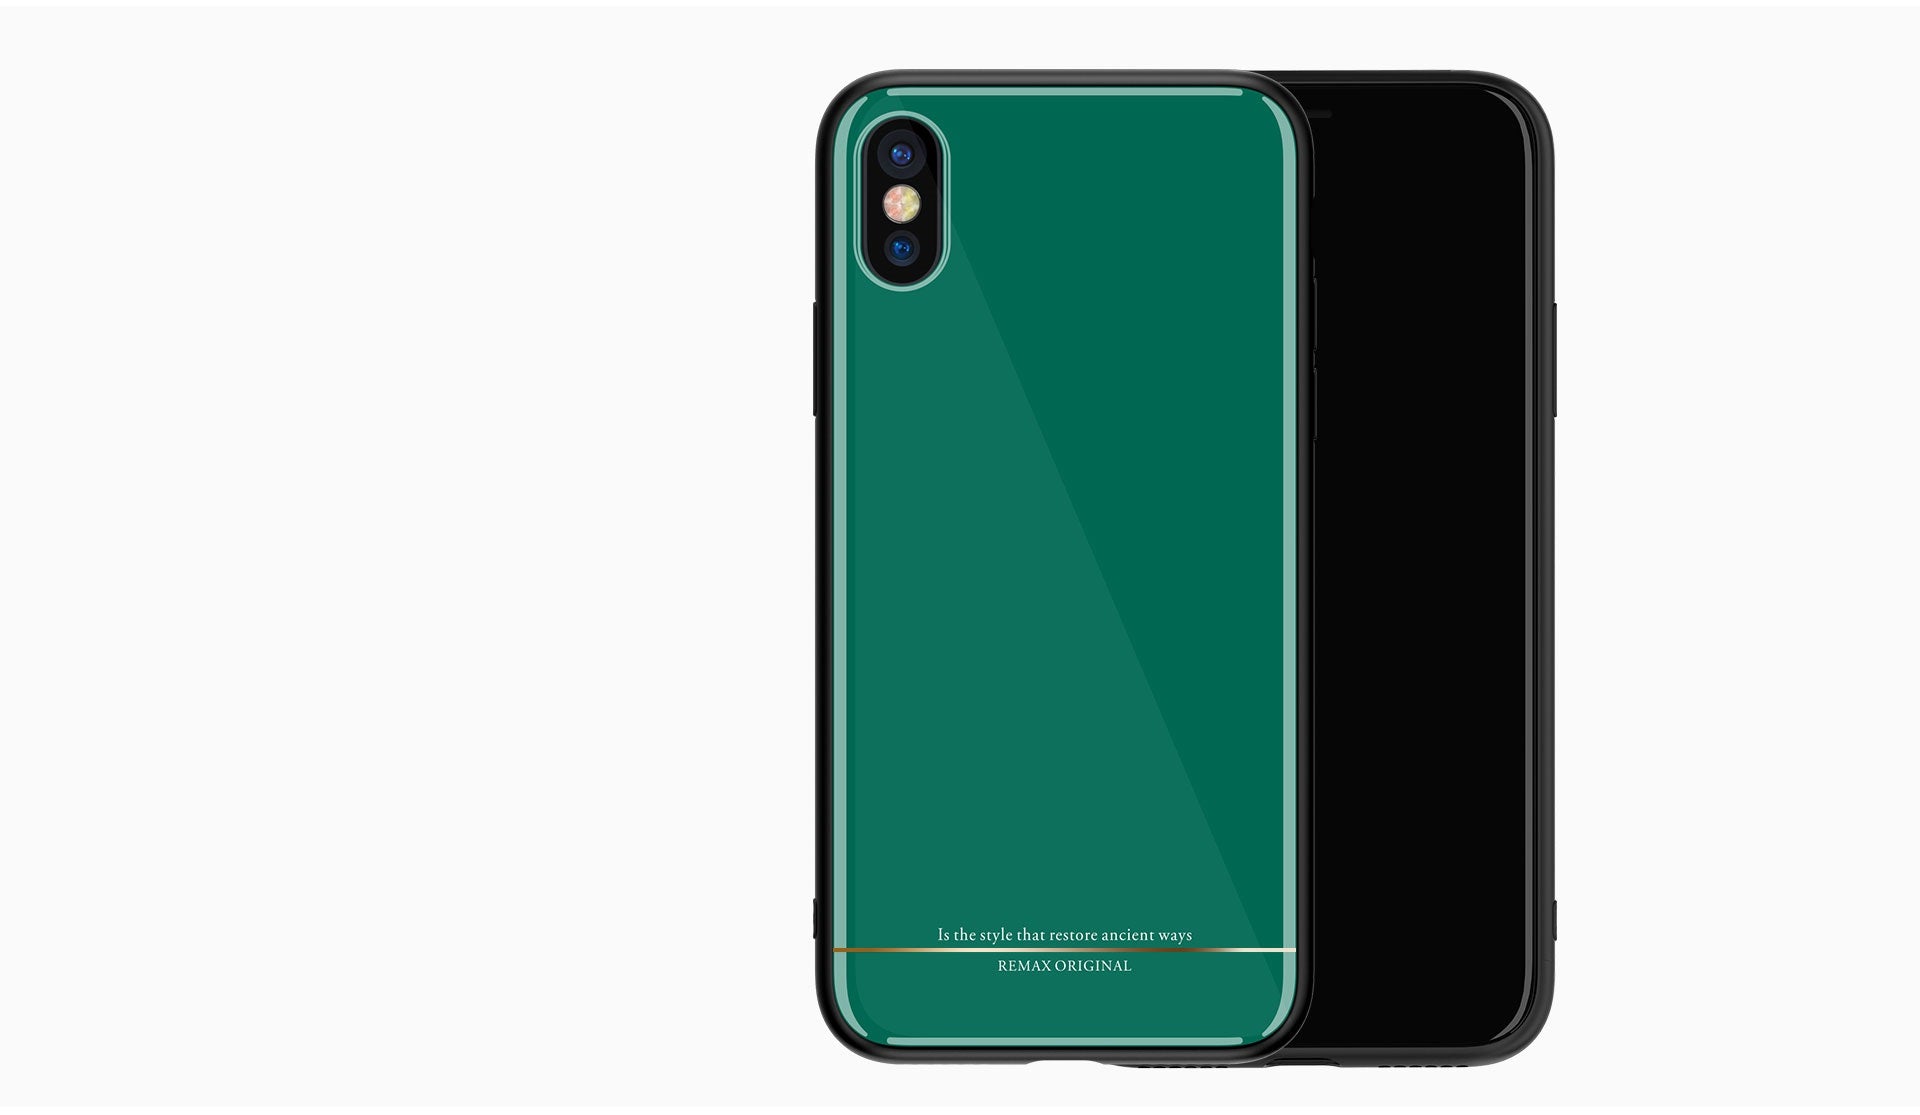 Yarose is the original & best super thin iPhone X case. It’s designed to keep the original look of your iPhone X while still protecting it